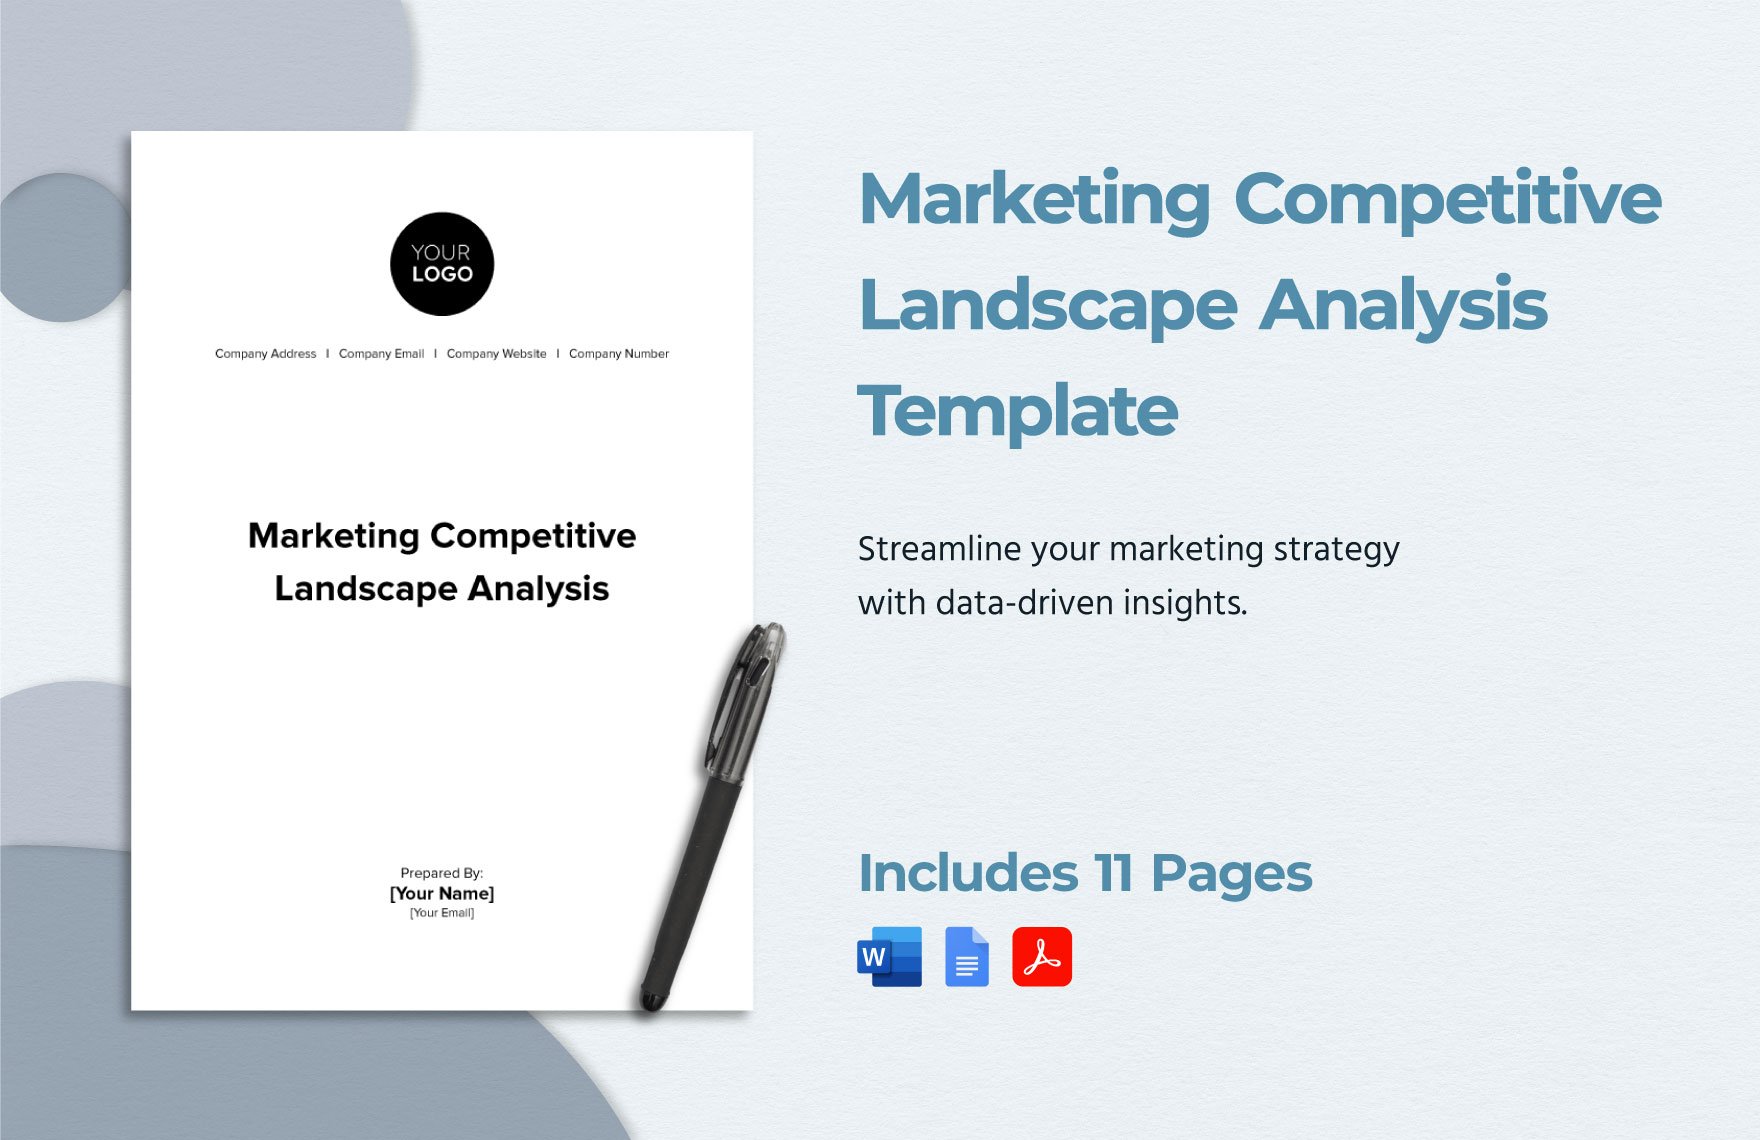 Marketing Competitive Landscape Analysis Template